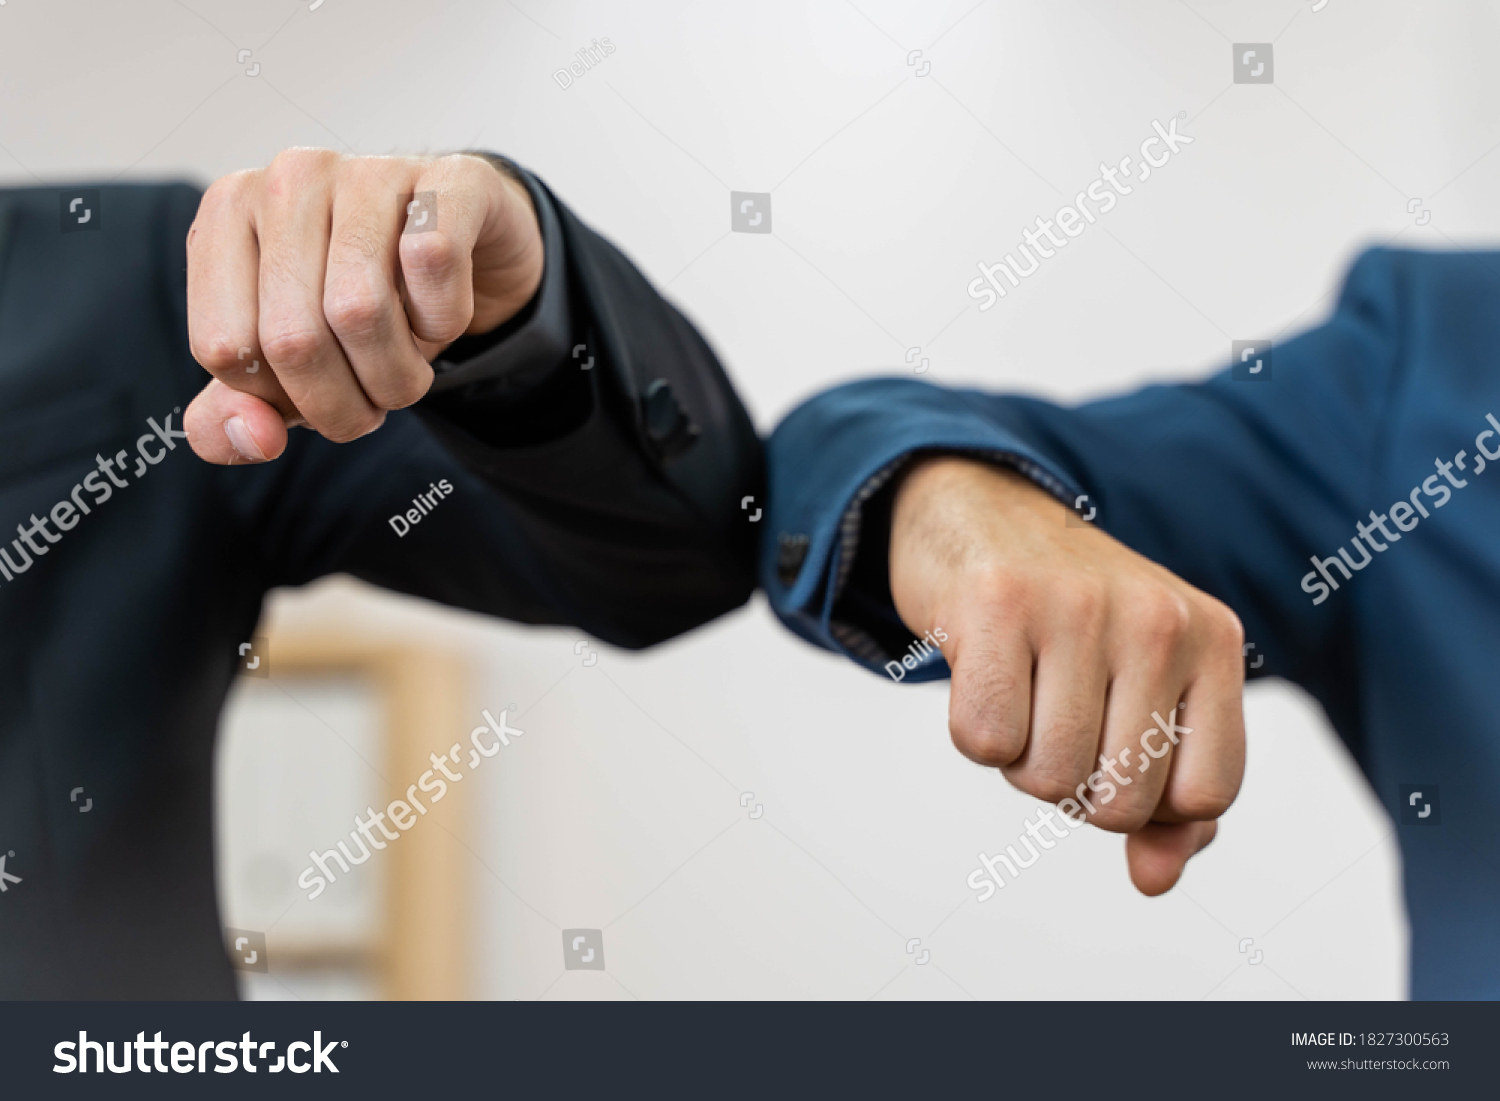 Coronavirus. Business workers elbow greeting in a white background. Elbow greeting because coronavirus. Business workers back to work in office after lockdown. #1827300563